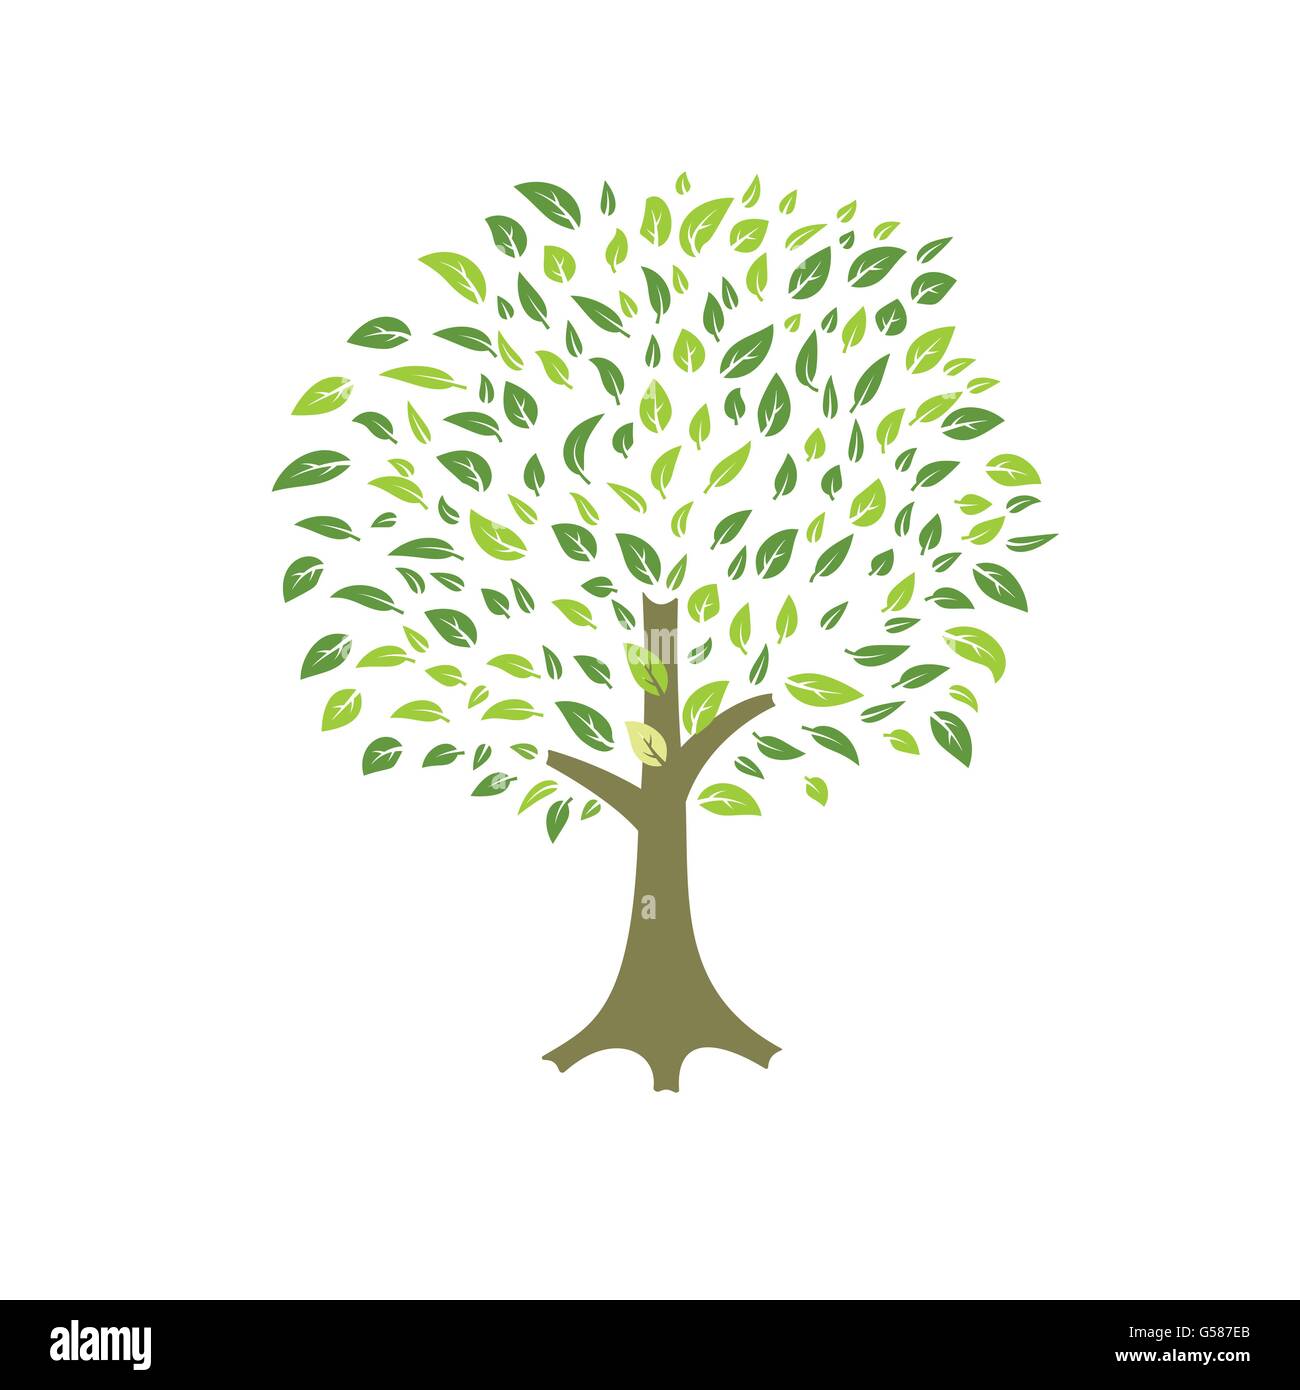 summer season tree with green leaves vector eco environment illustration Stock Vector